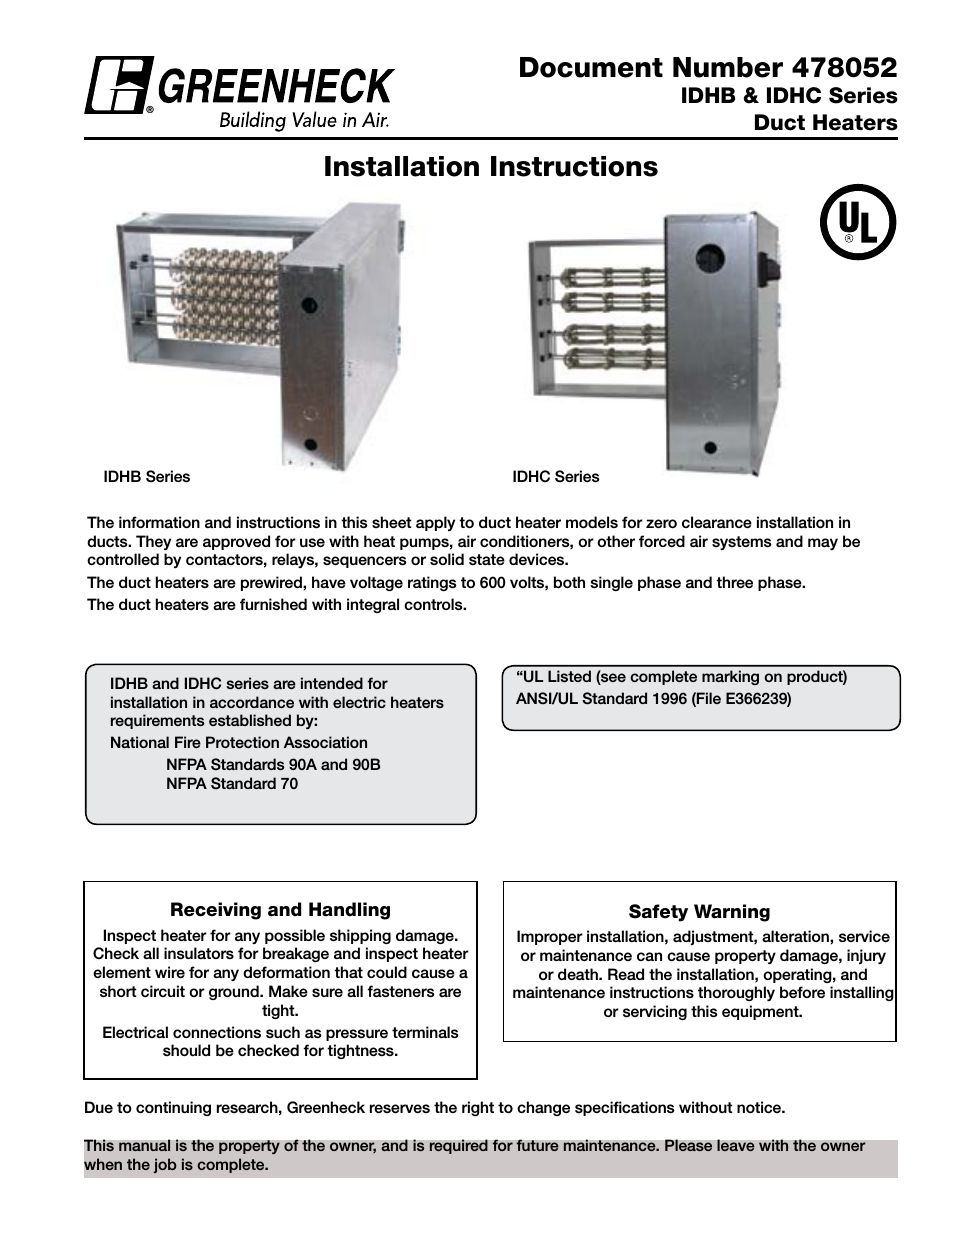 Duct Heaters Series IDHB and IDHC (478052)